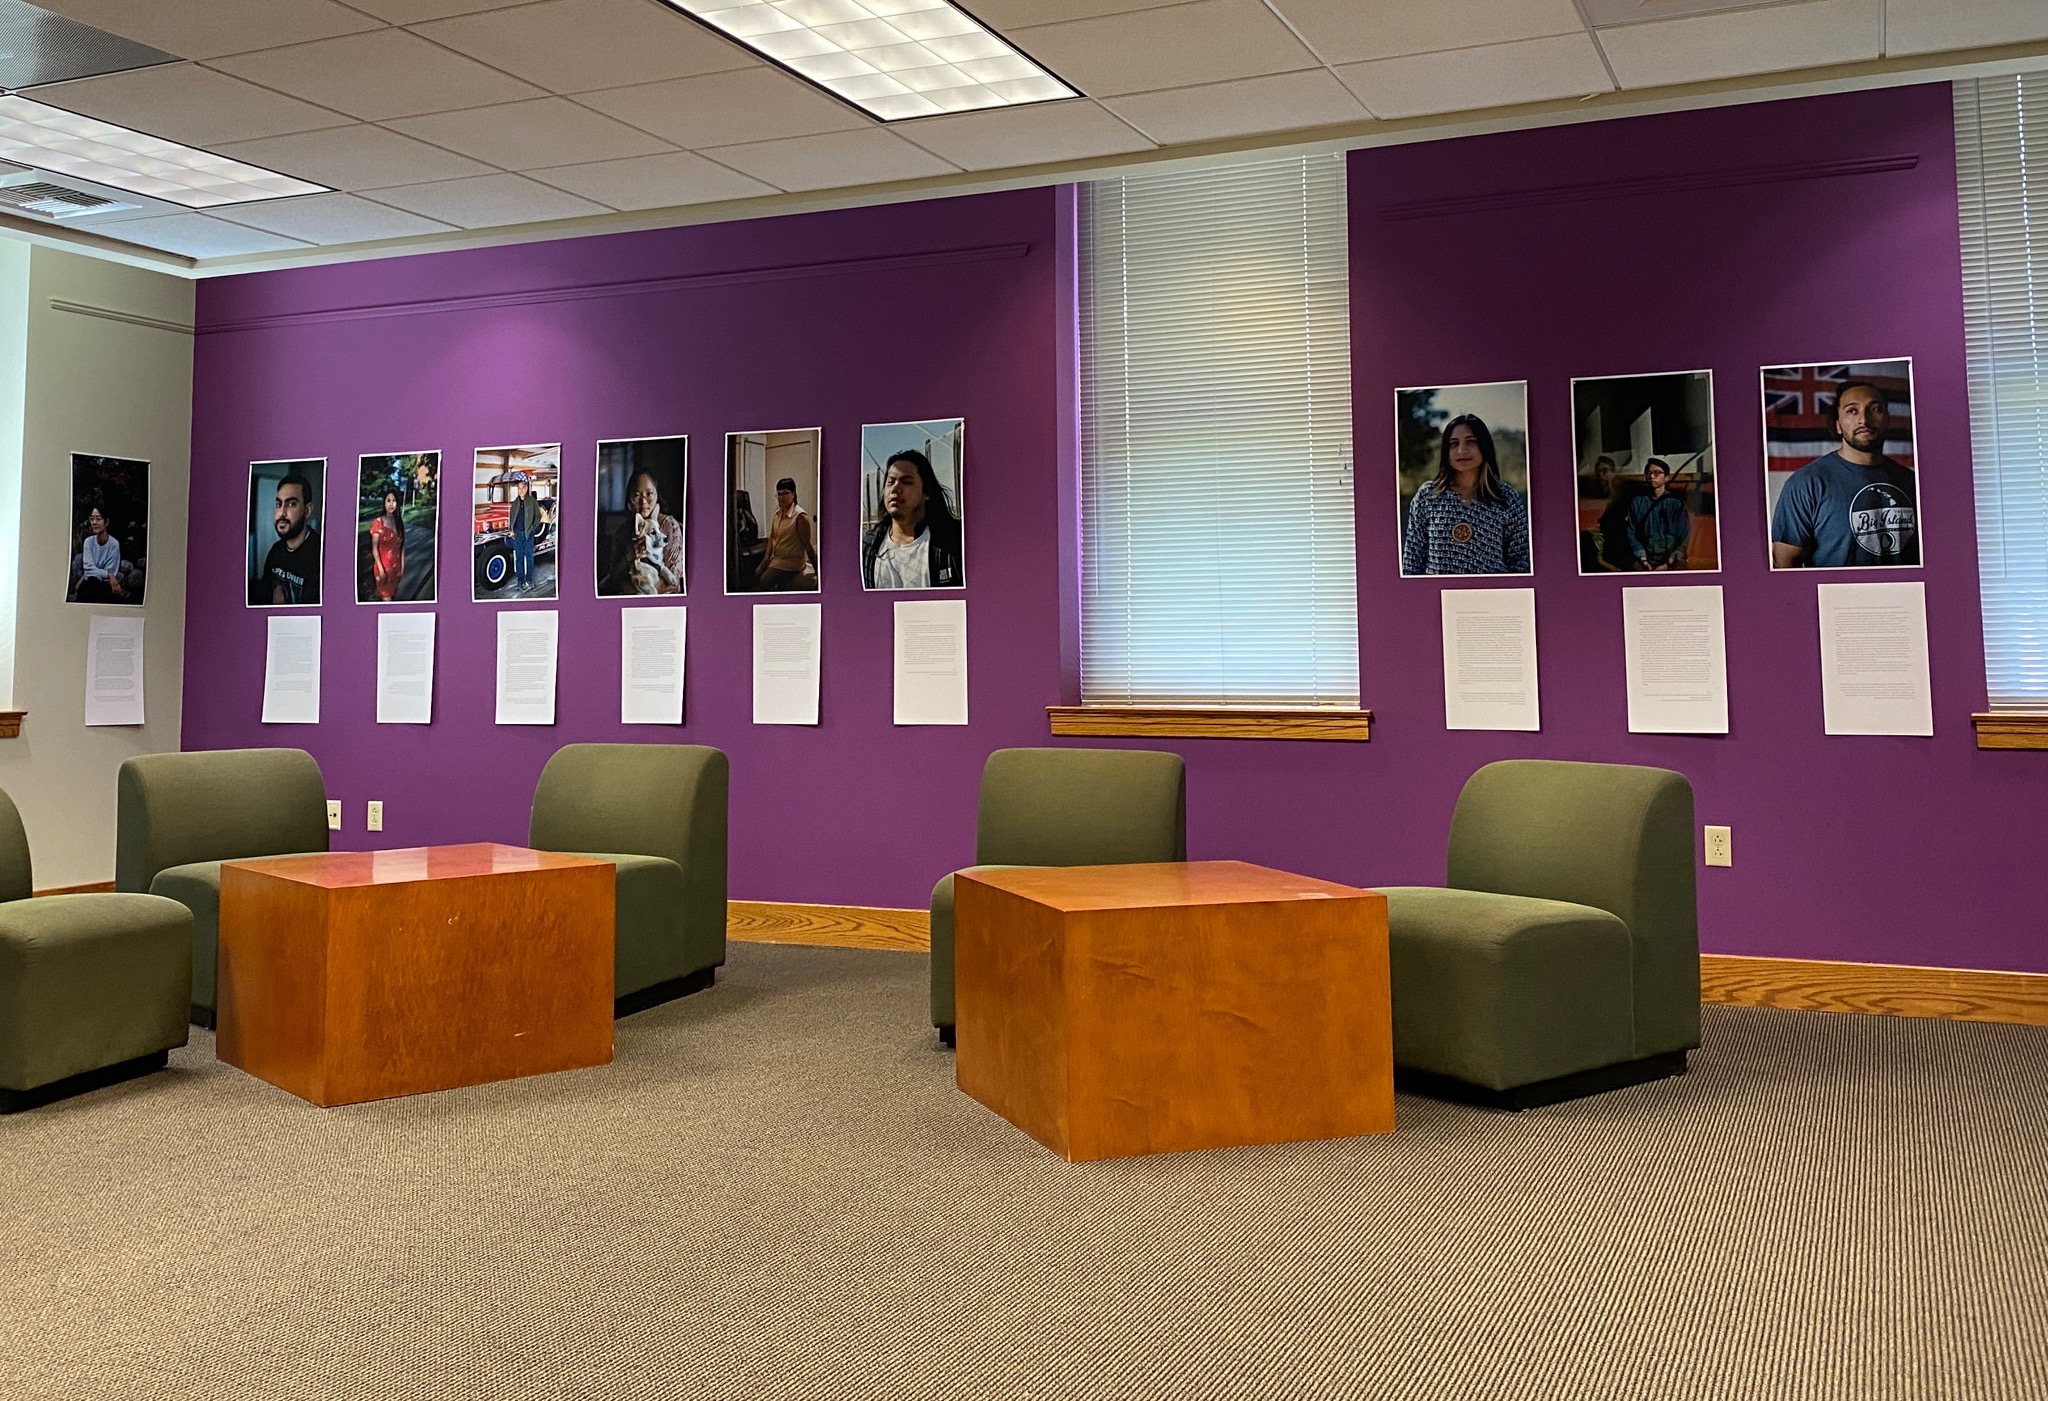 WAGE Center with Albaugh Photos on Wall